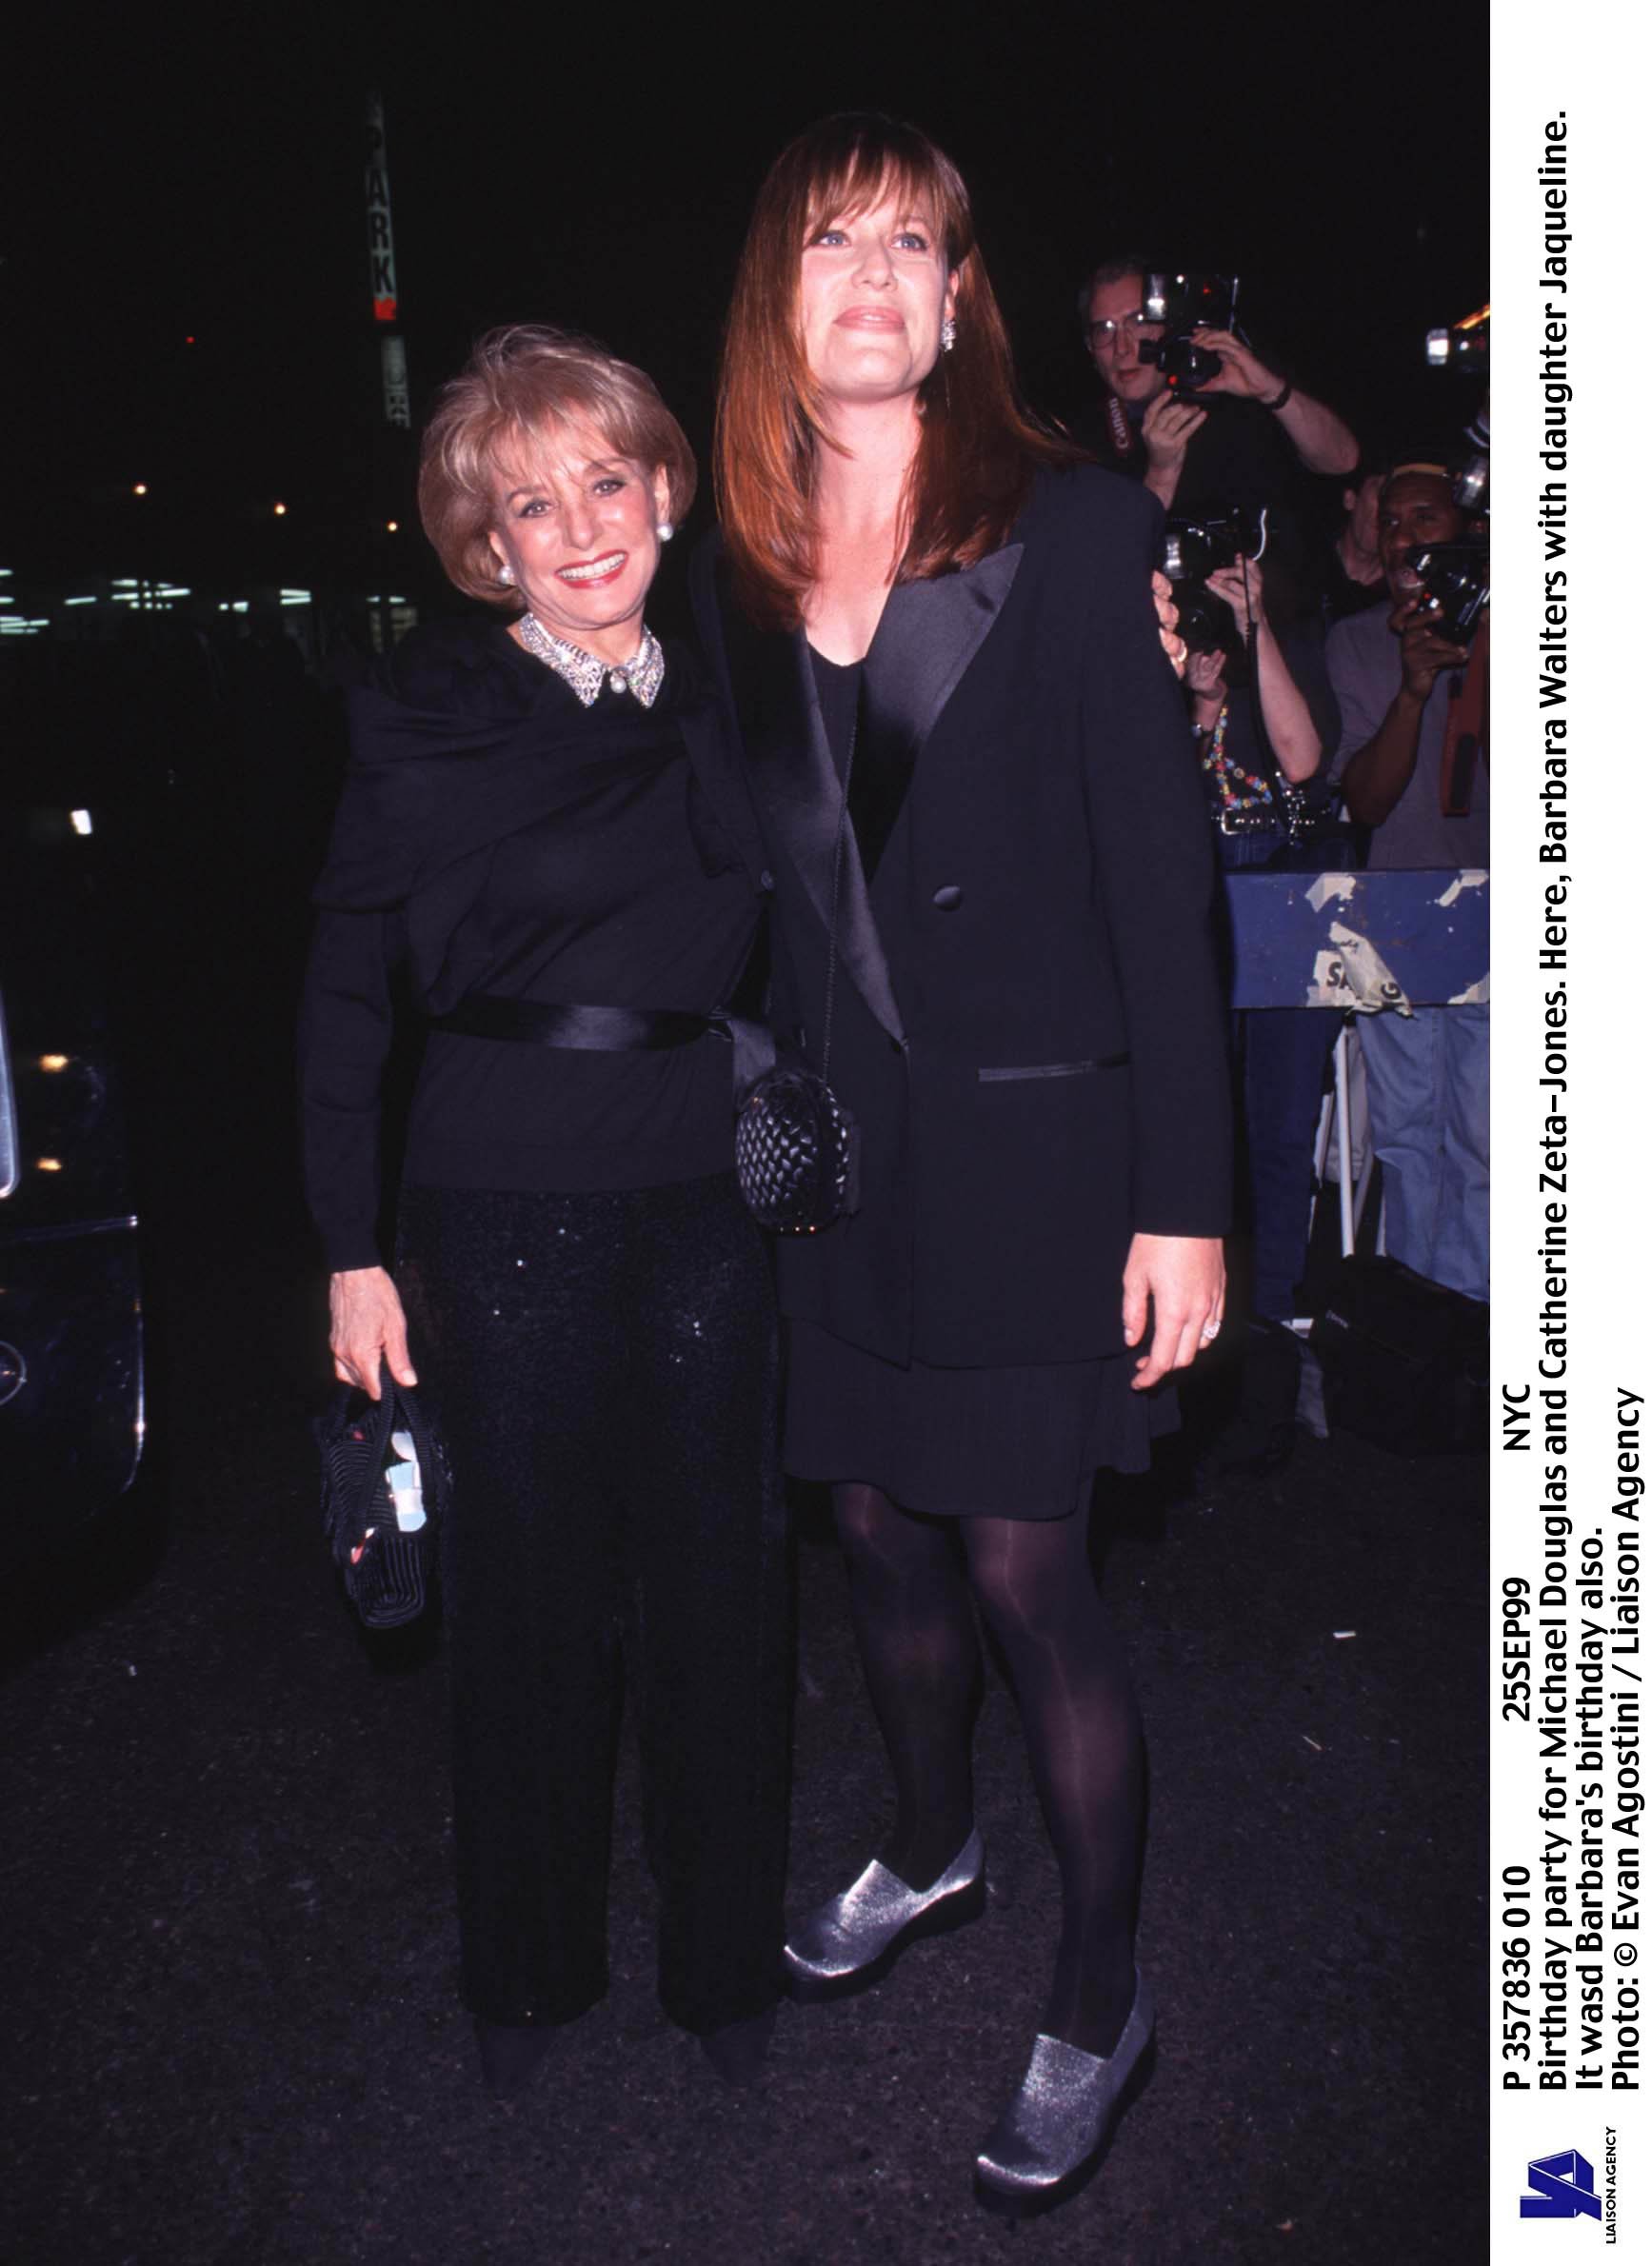  Barbara Walters and daughter Jaqueline at a birthday party for Michael Douglas and Catherine Zeta Jones, September 25, 1999 | Photo: GettyImages